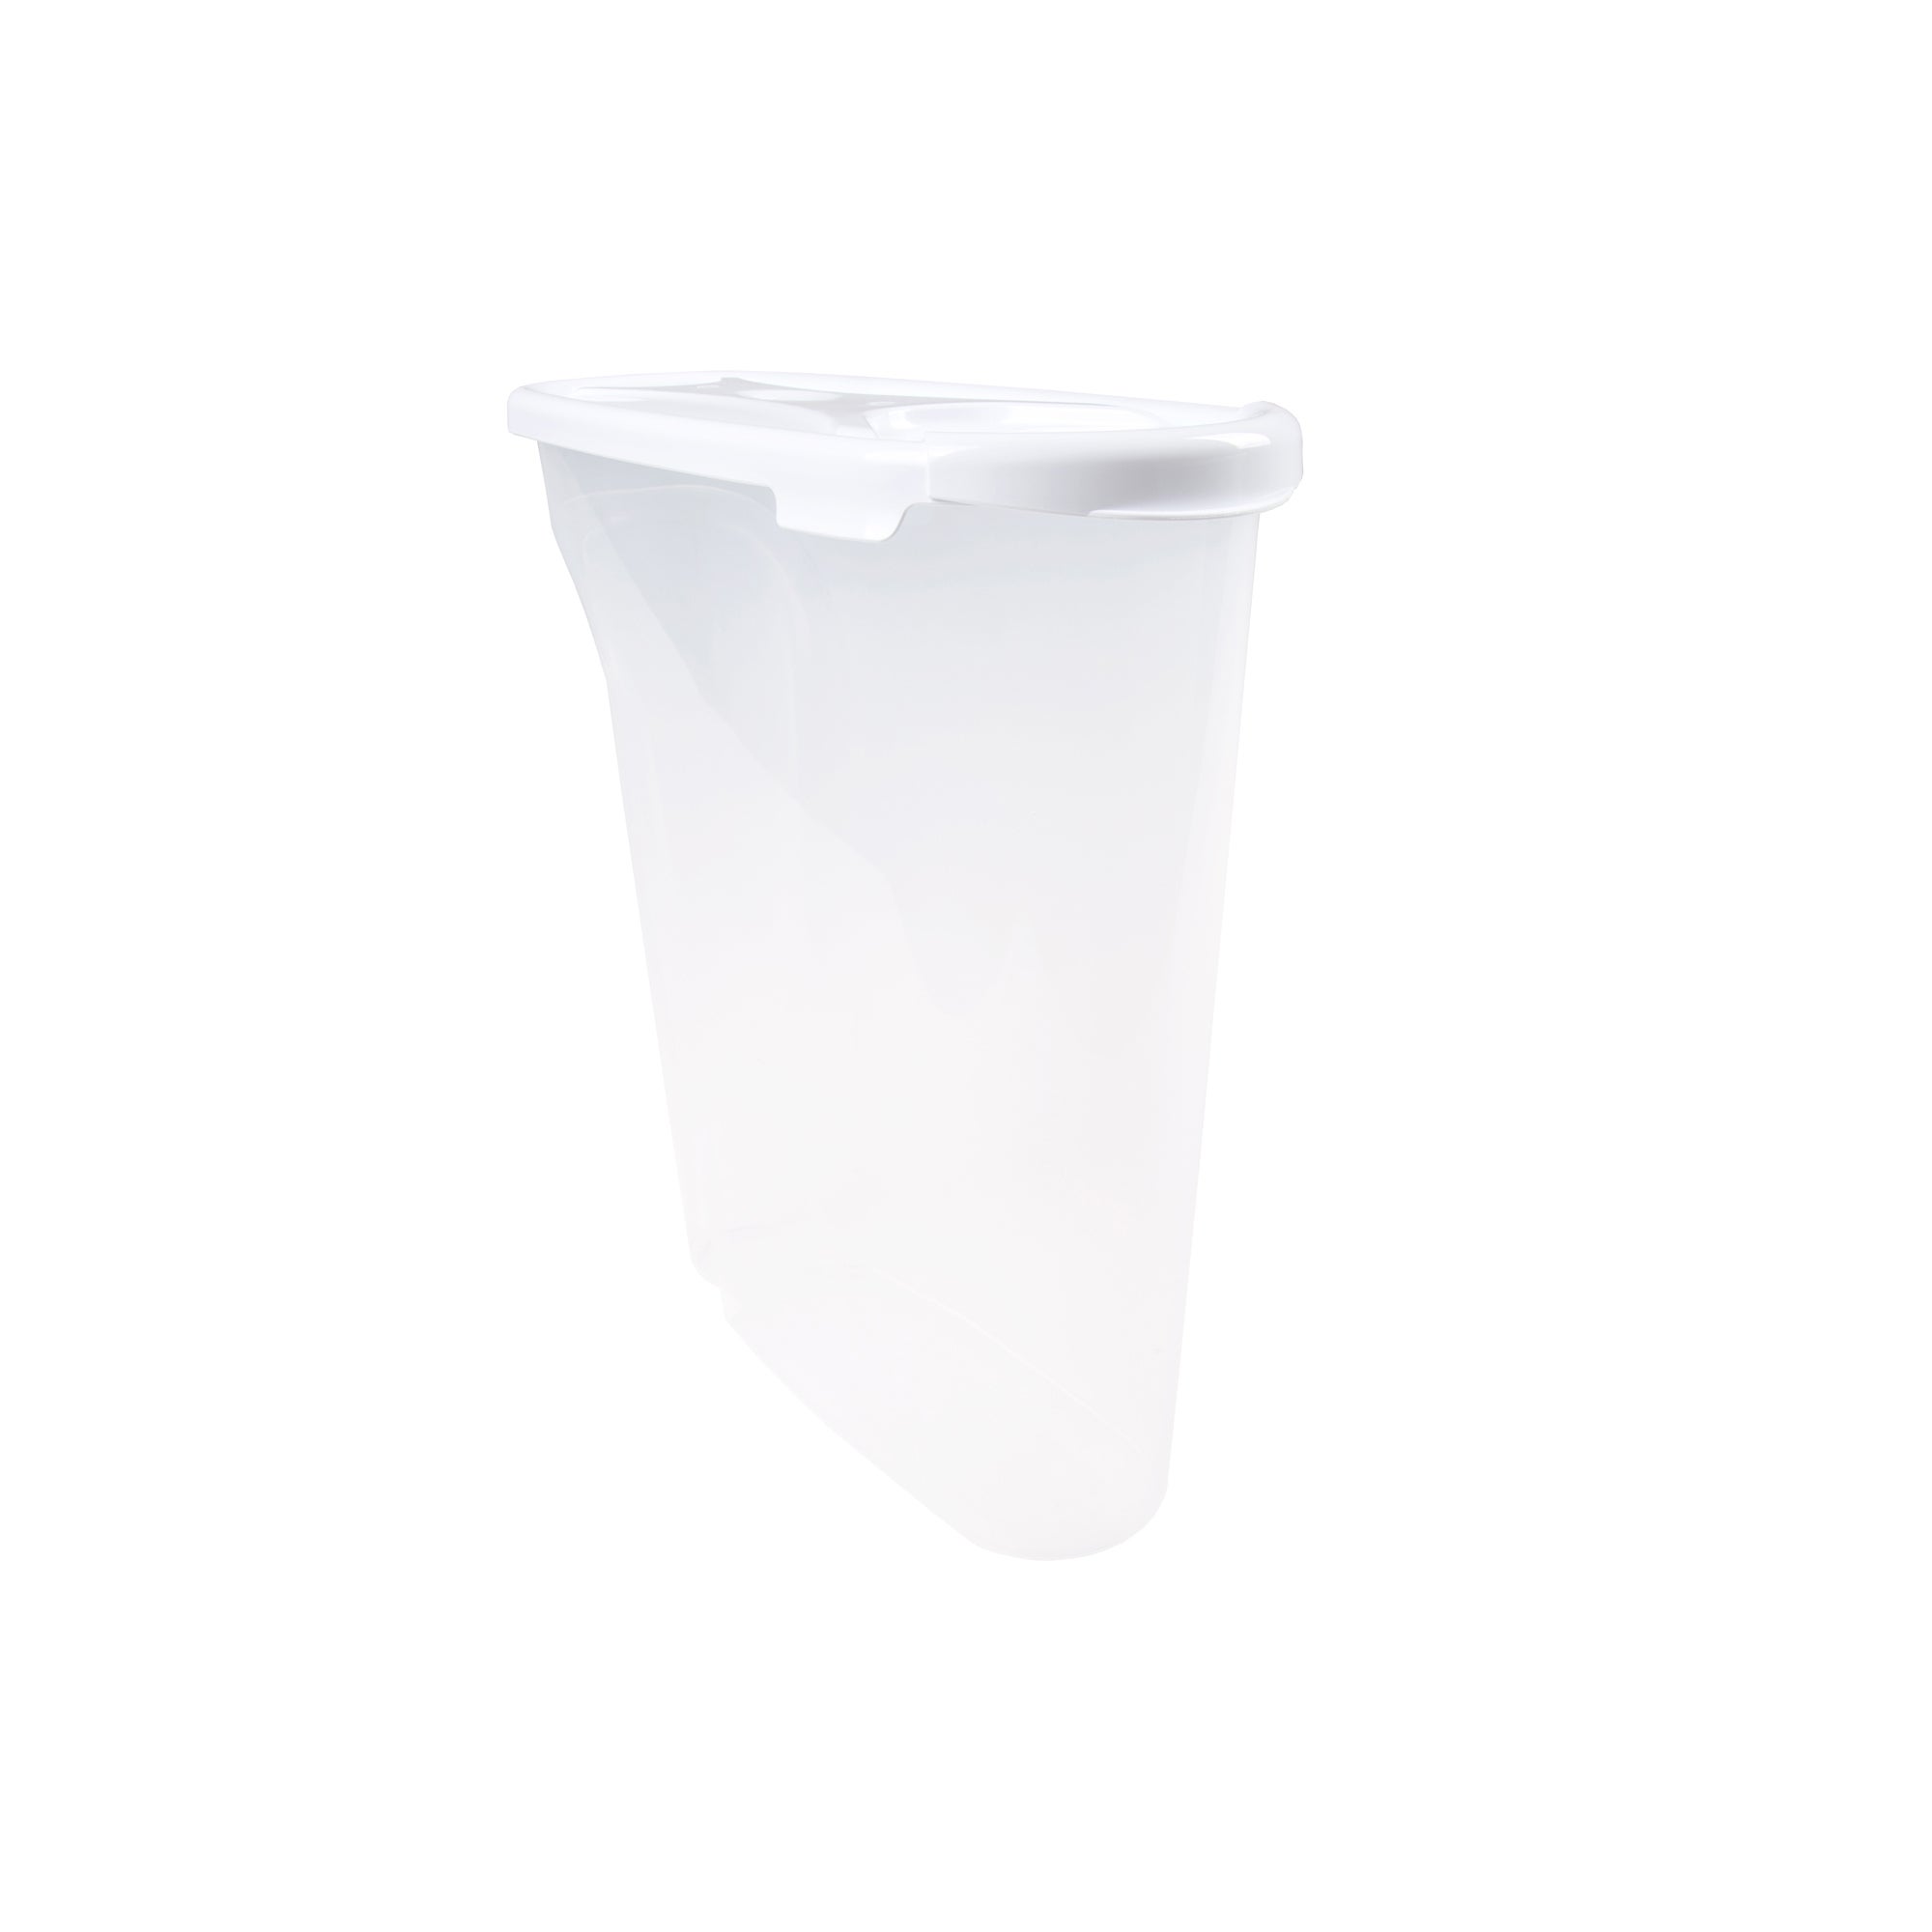 Image of 5L Cereal Dispenser Clear and White